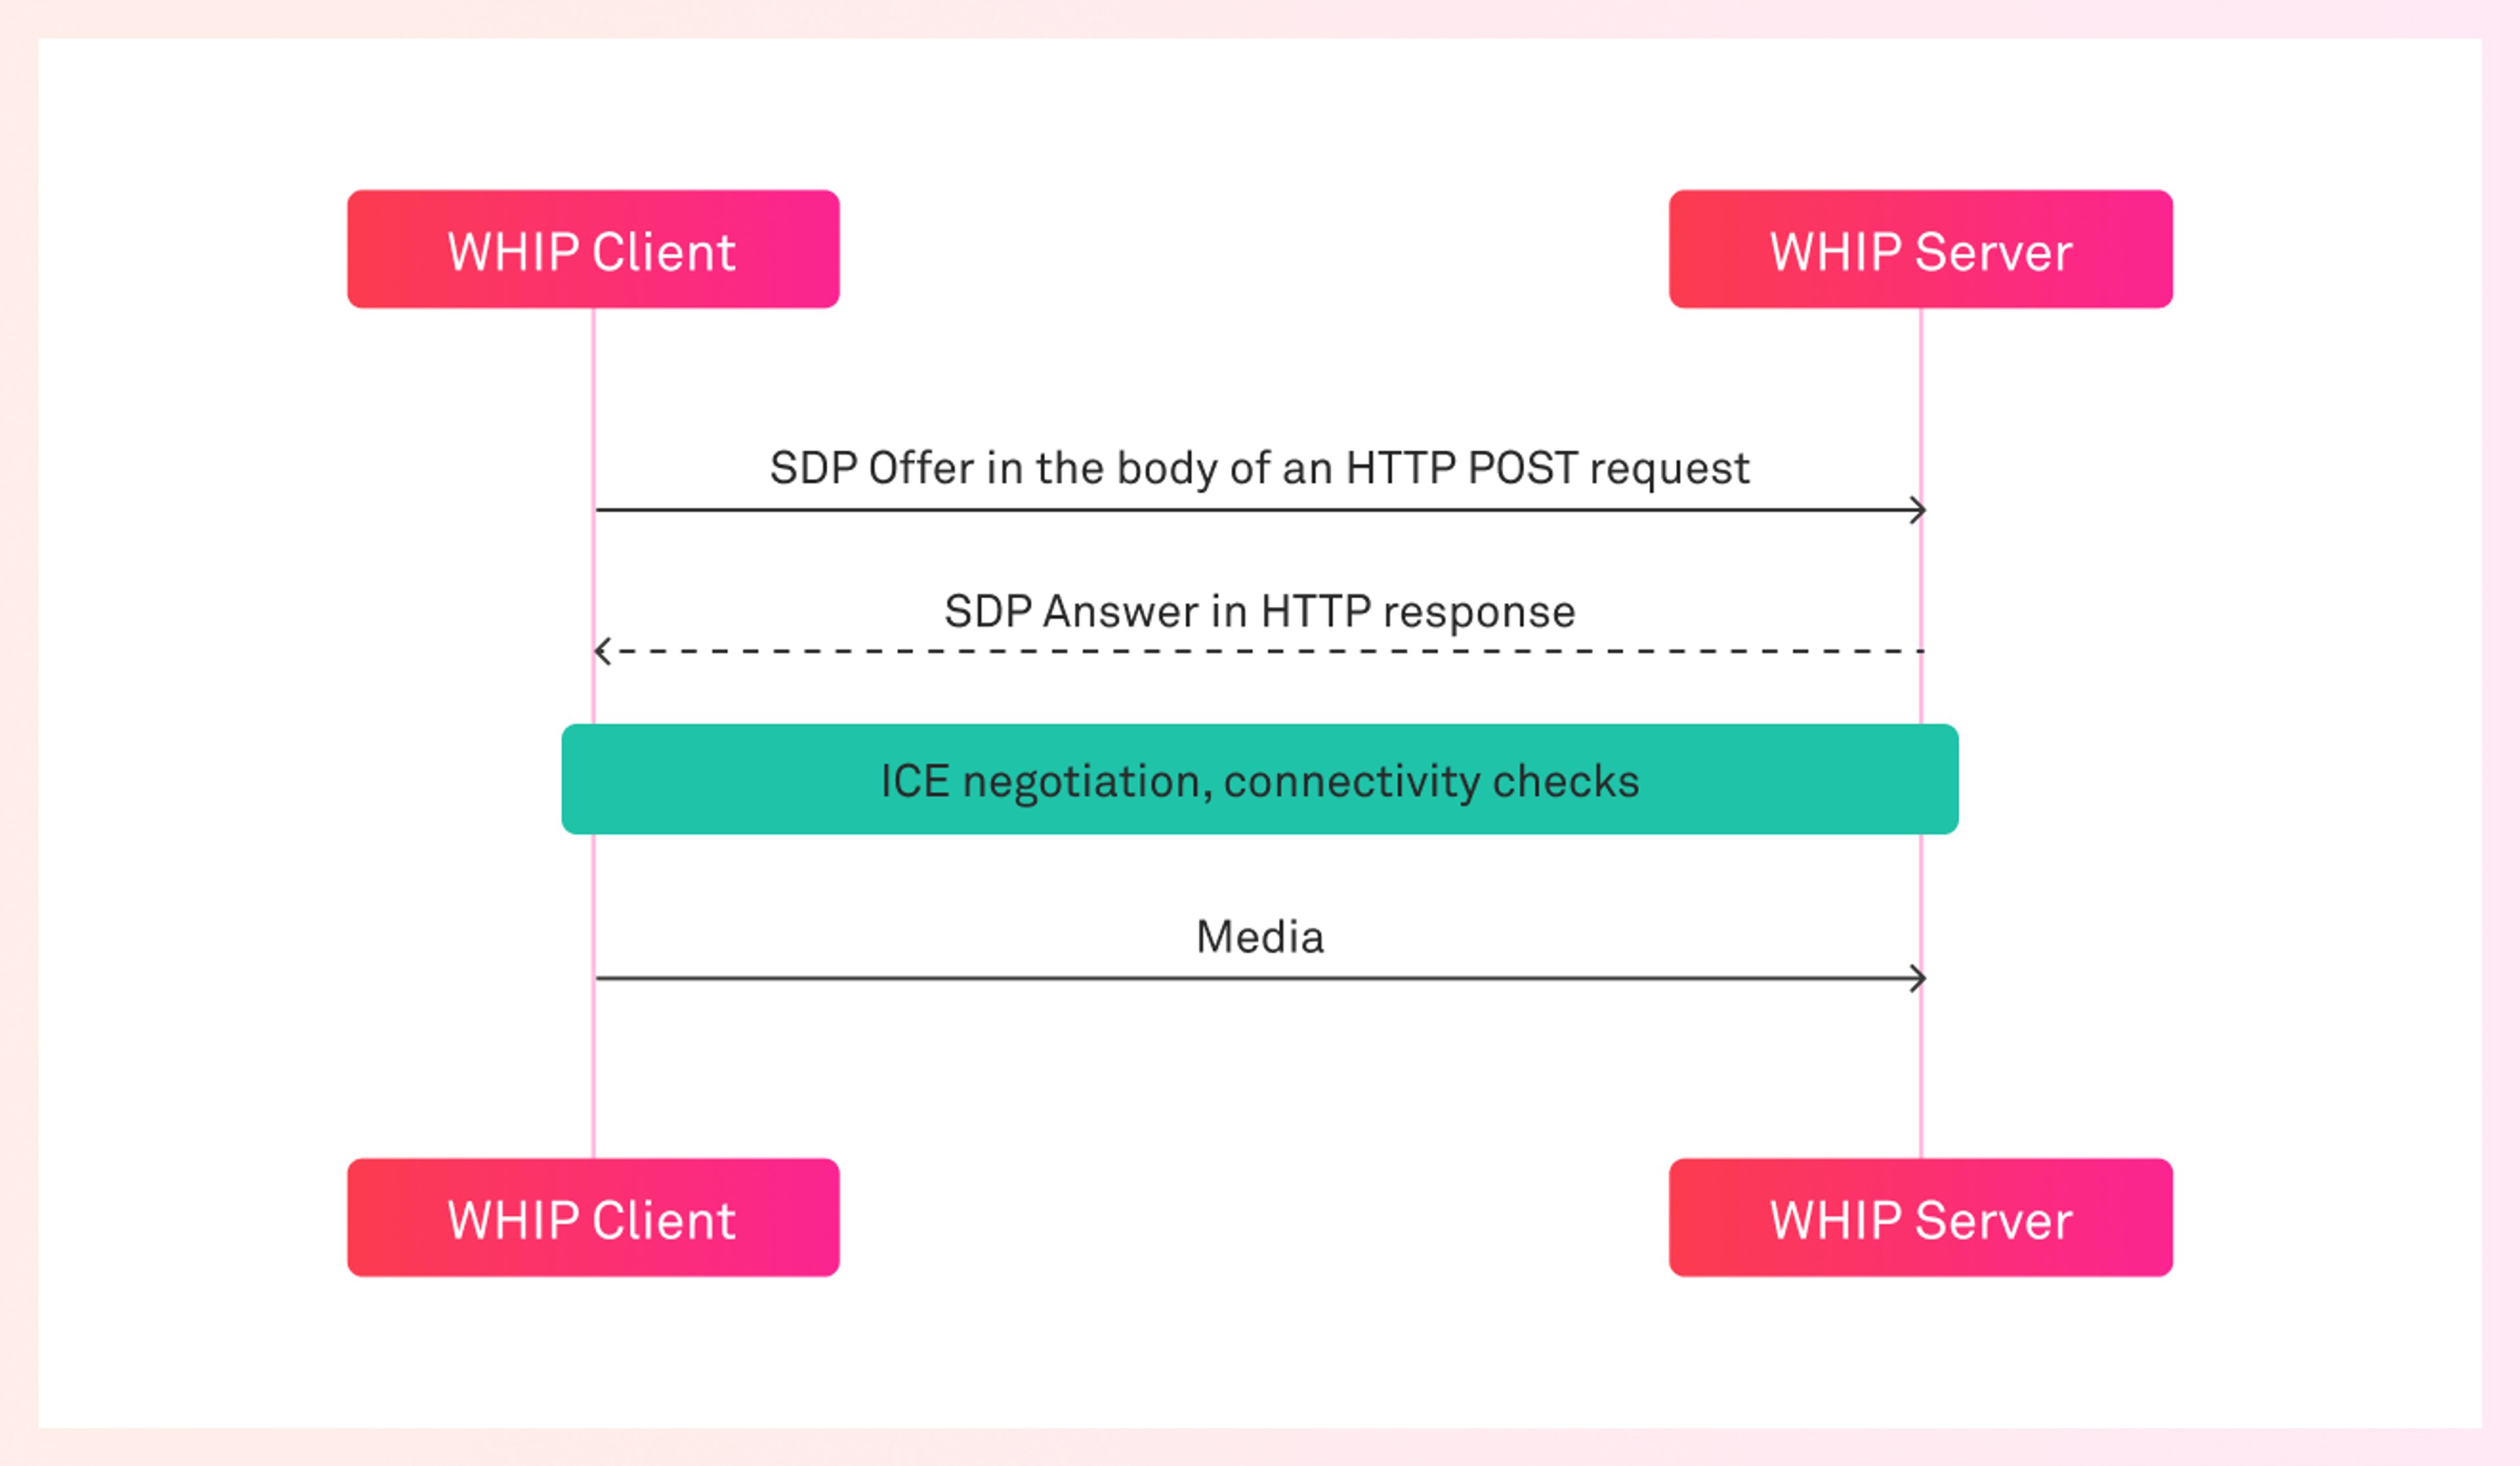 A sequence diagram showcasing the communication between a WHIP Client and WHIP server